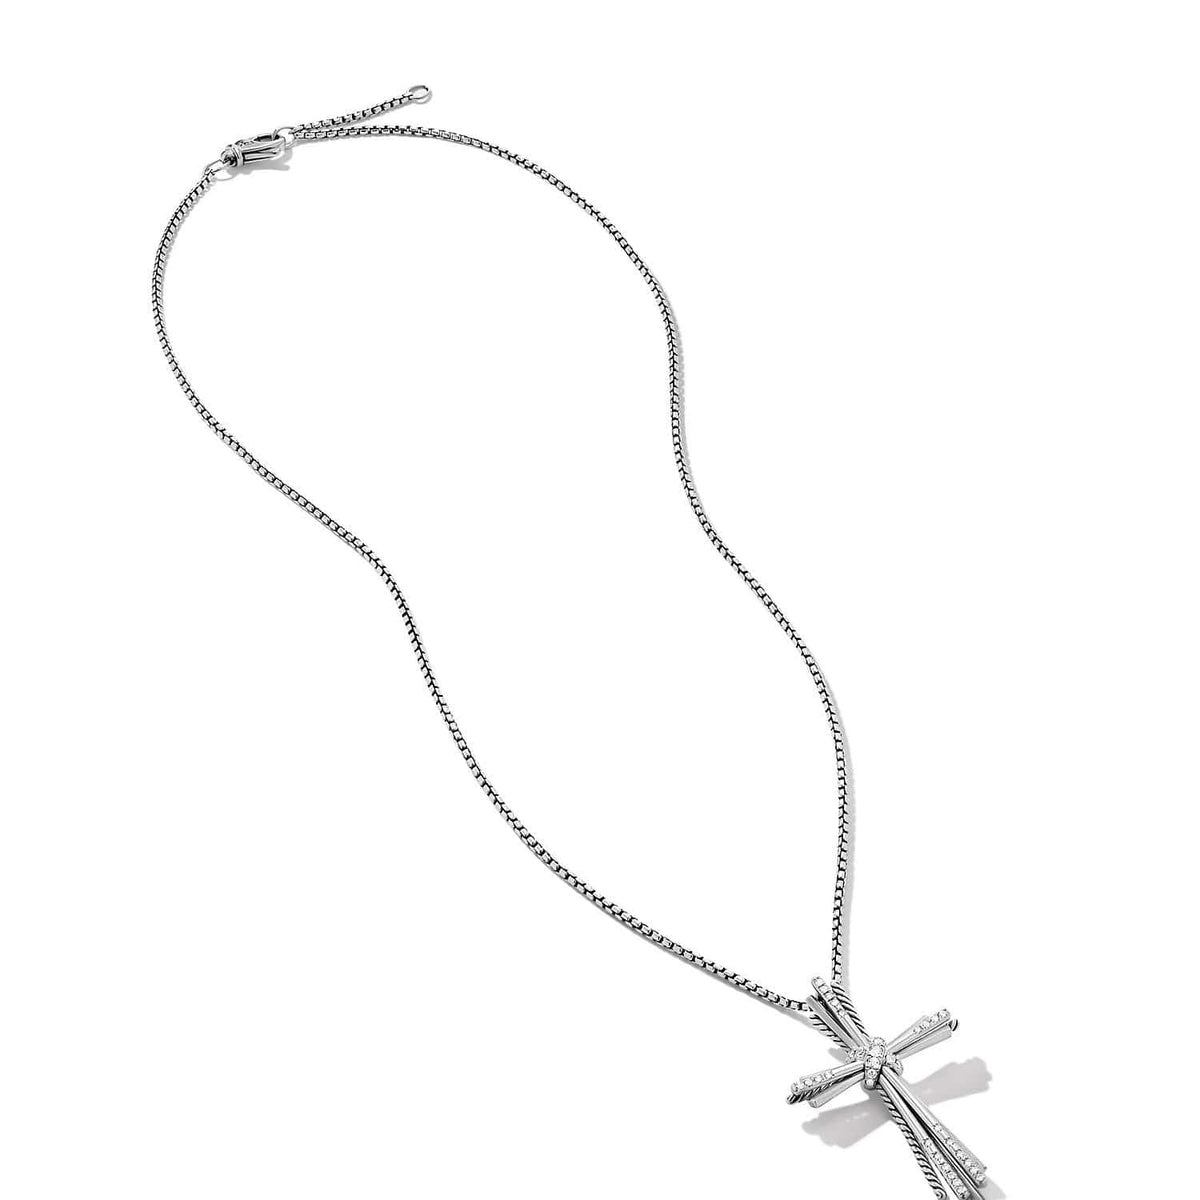 Angelika Cross Necklace with Pavé Diamonds, Sterling Silver, Long's Jewelers